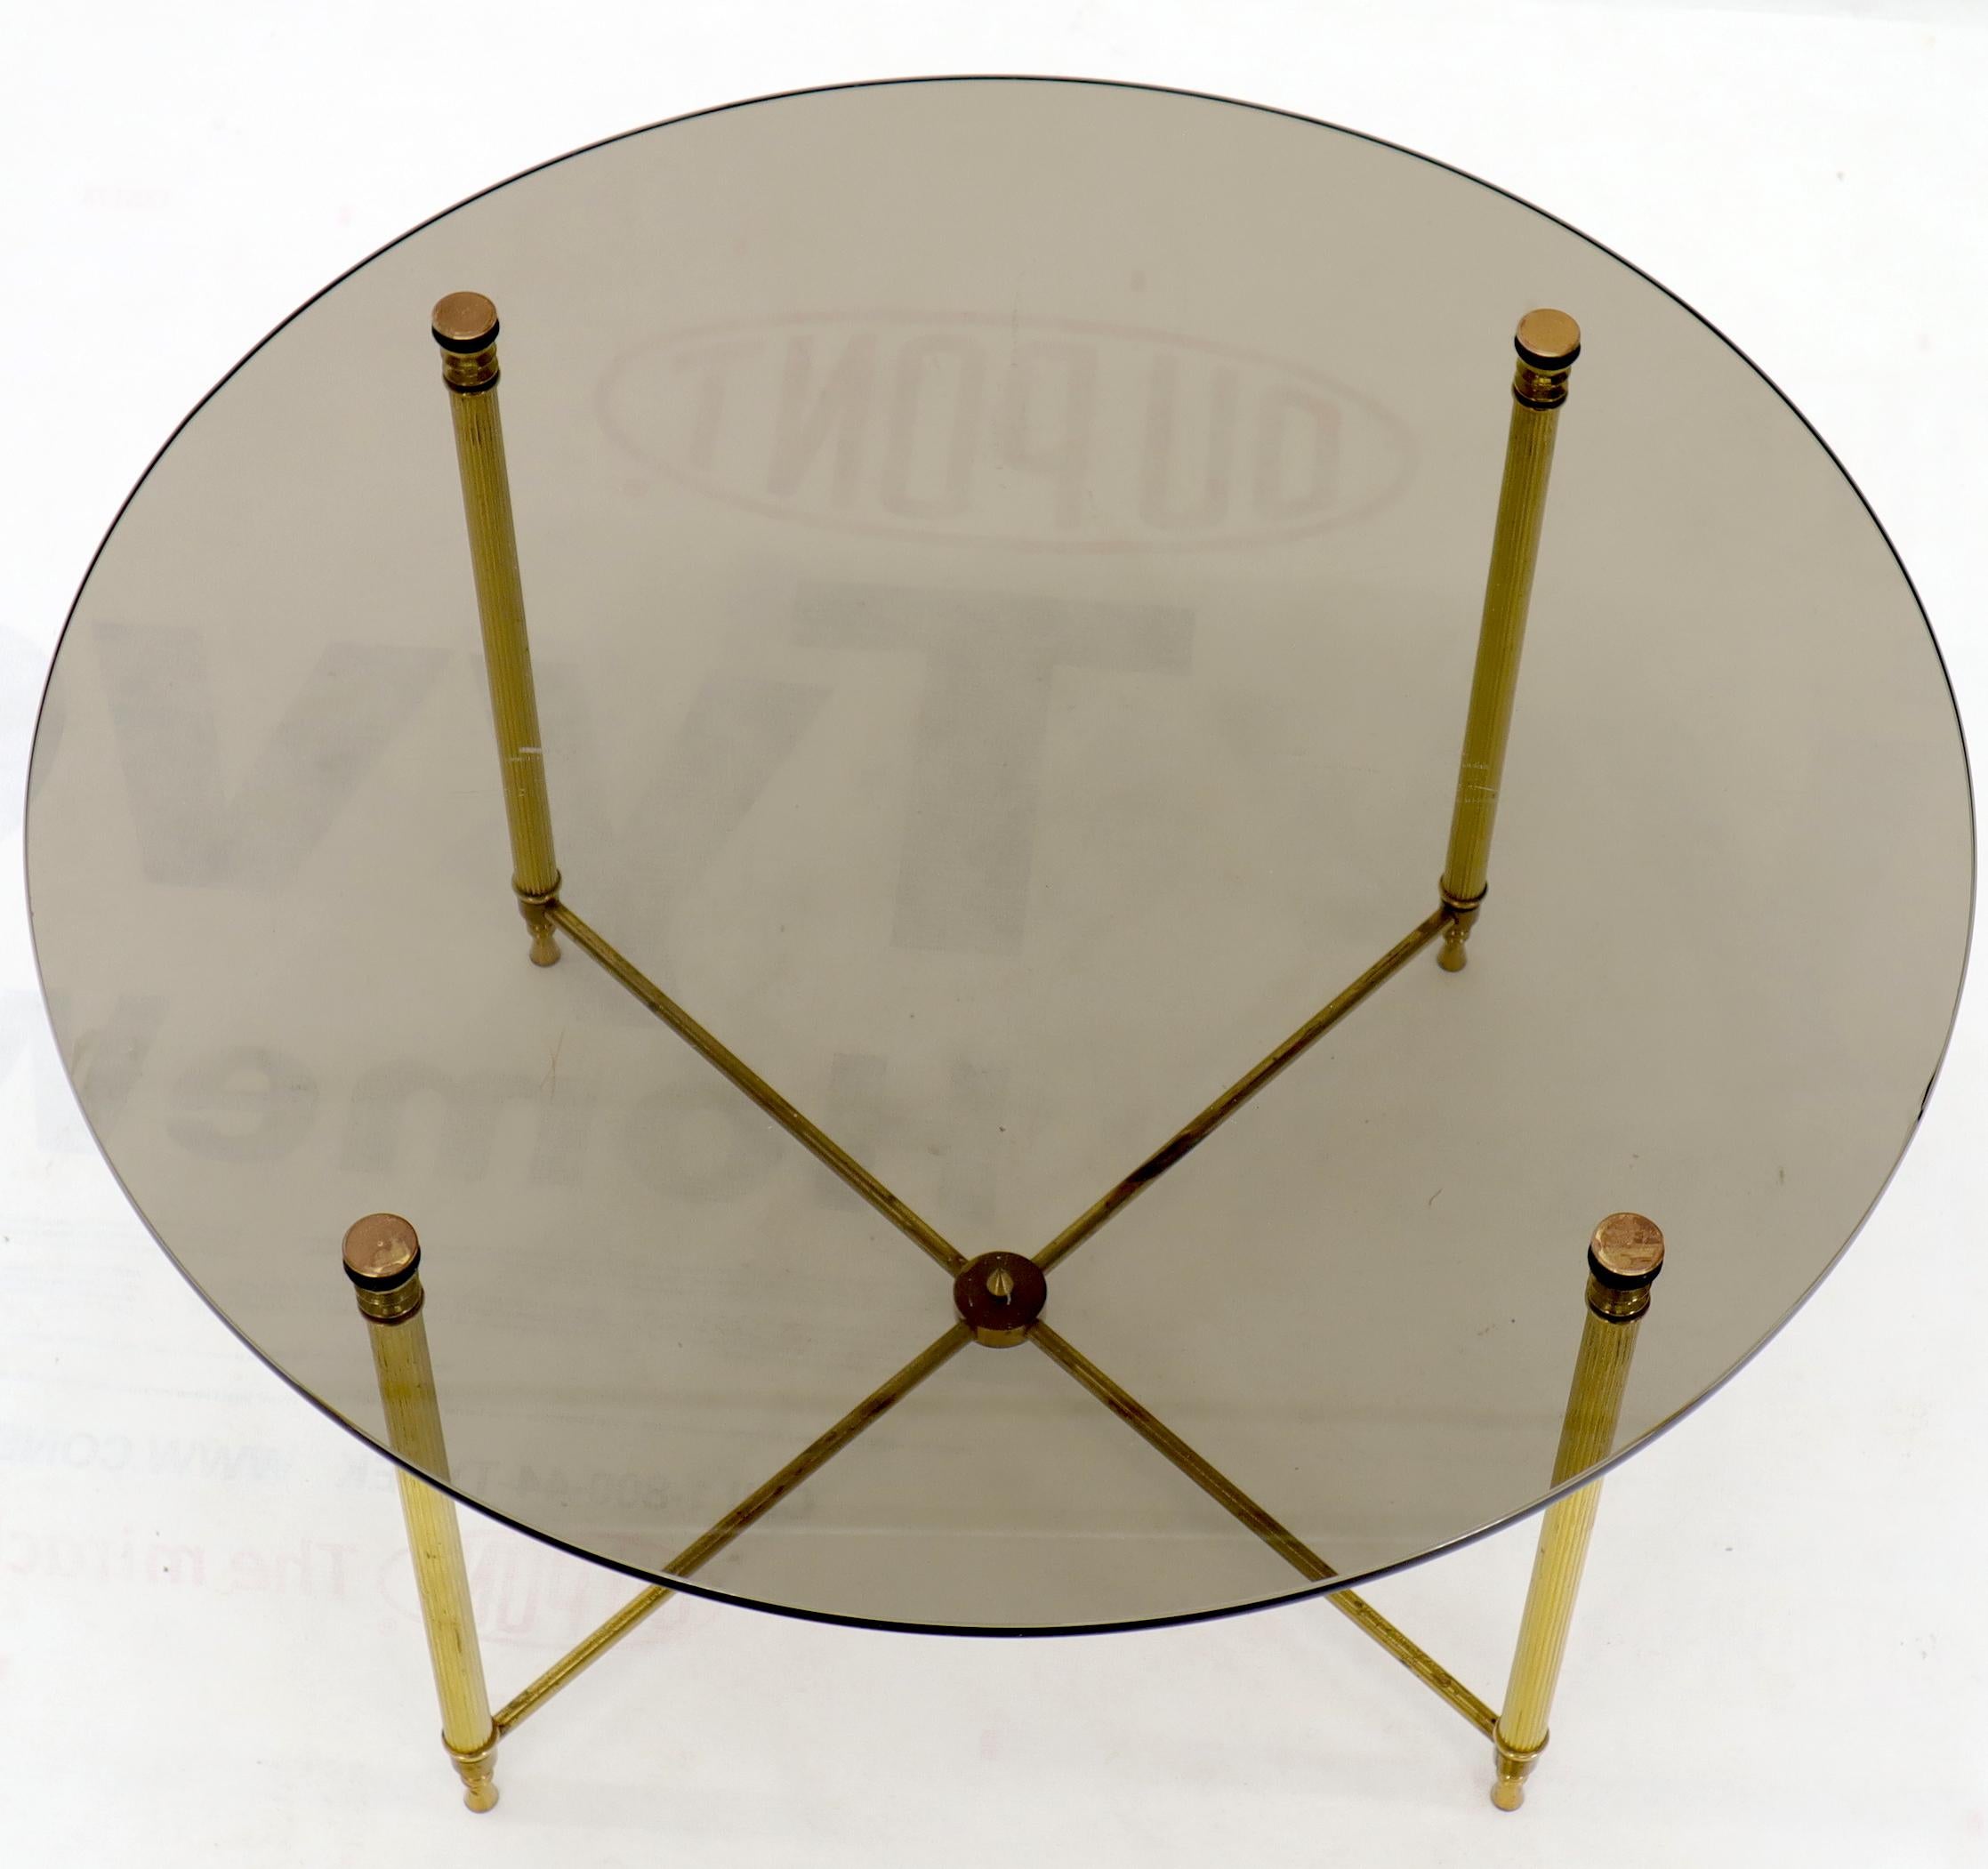 Circular Round Smoked Glass Brass Legs Nesting Coffee Table In Good Condition For Sale In Rockaway, NJ